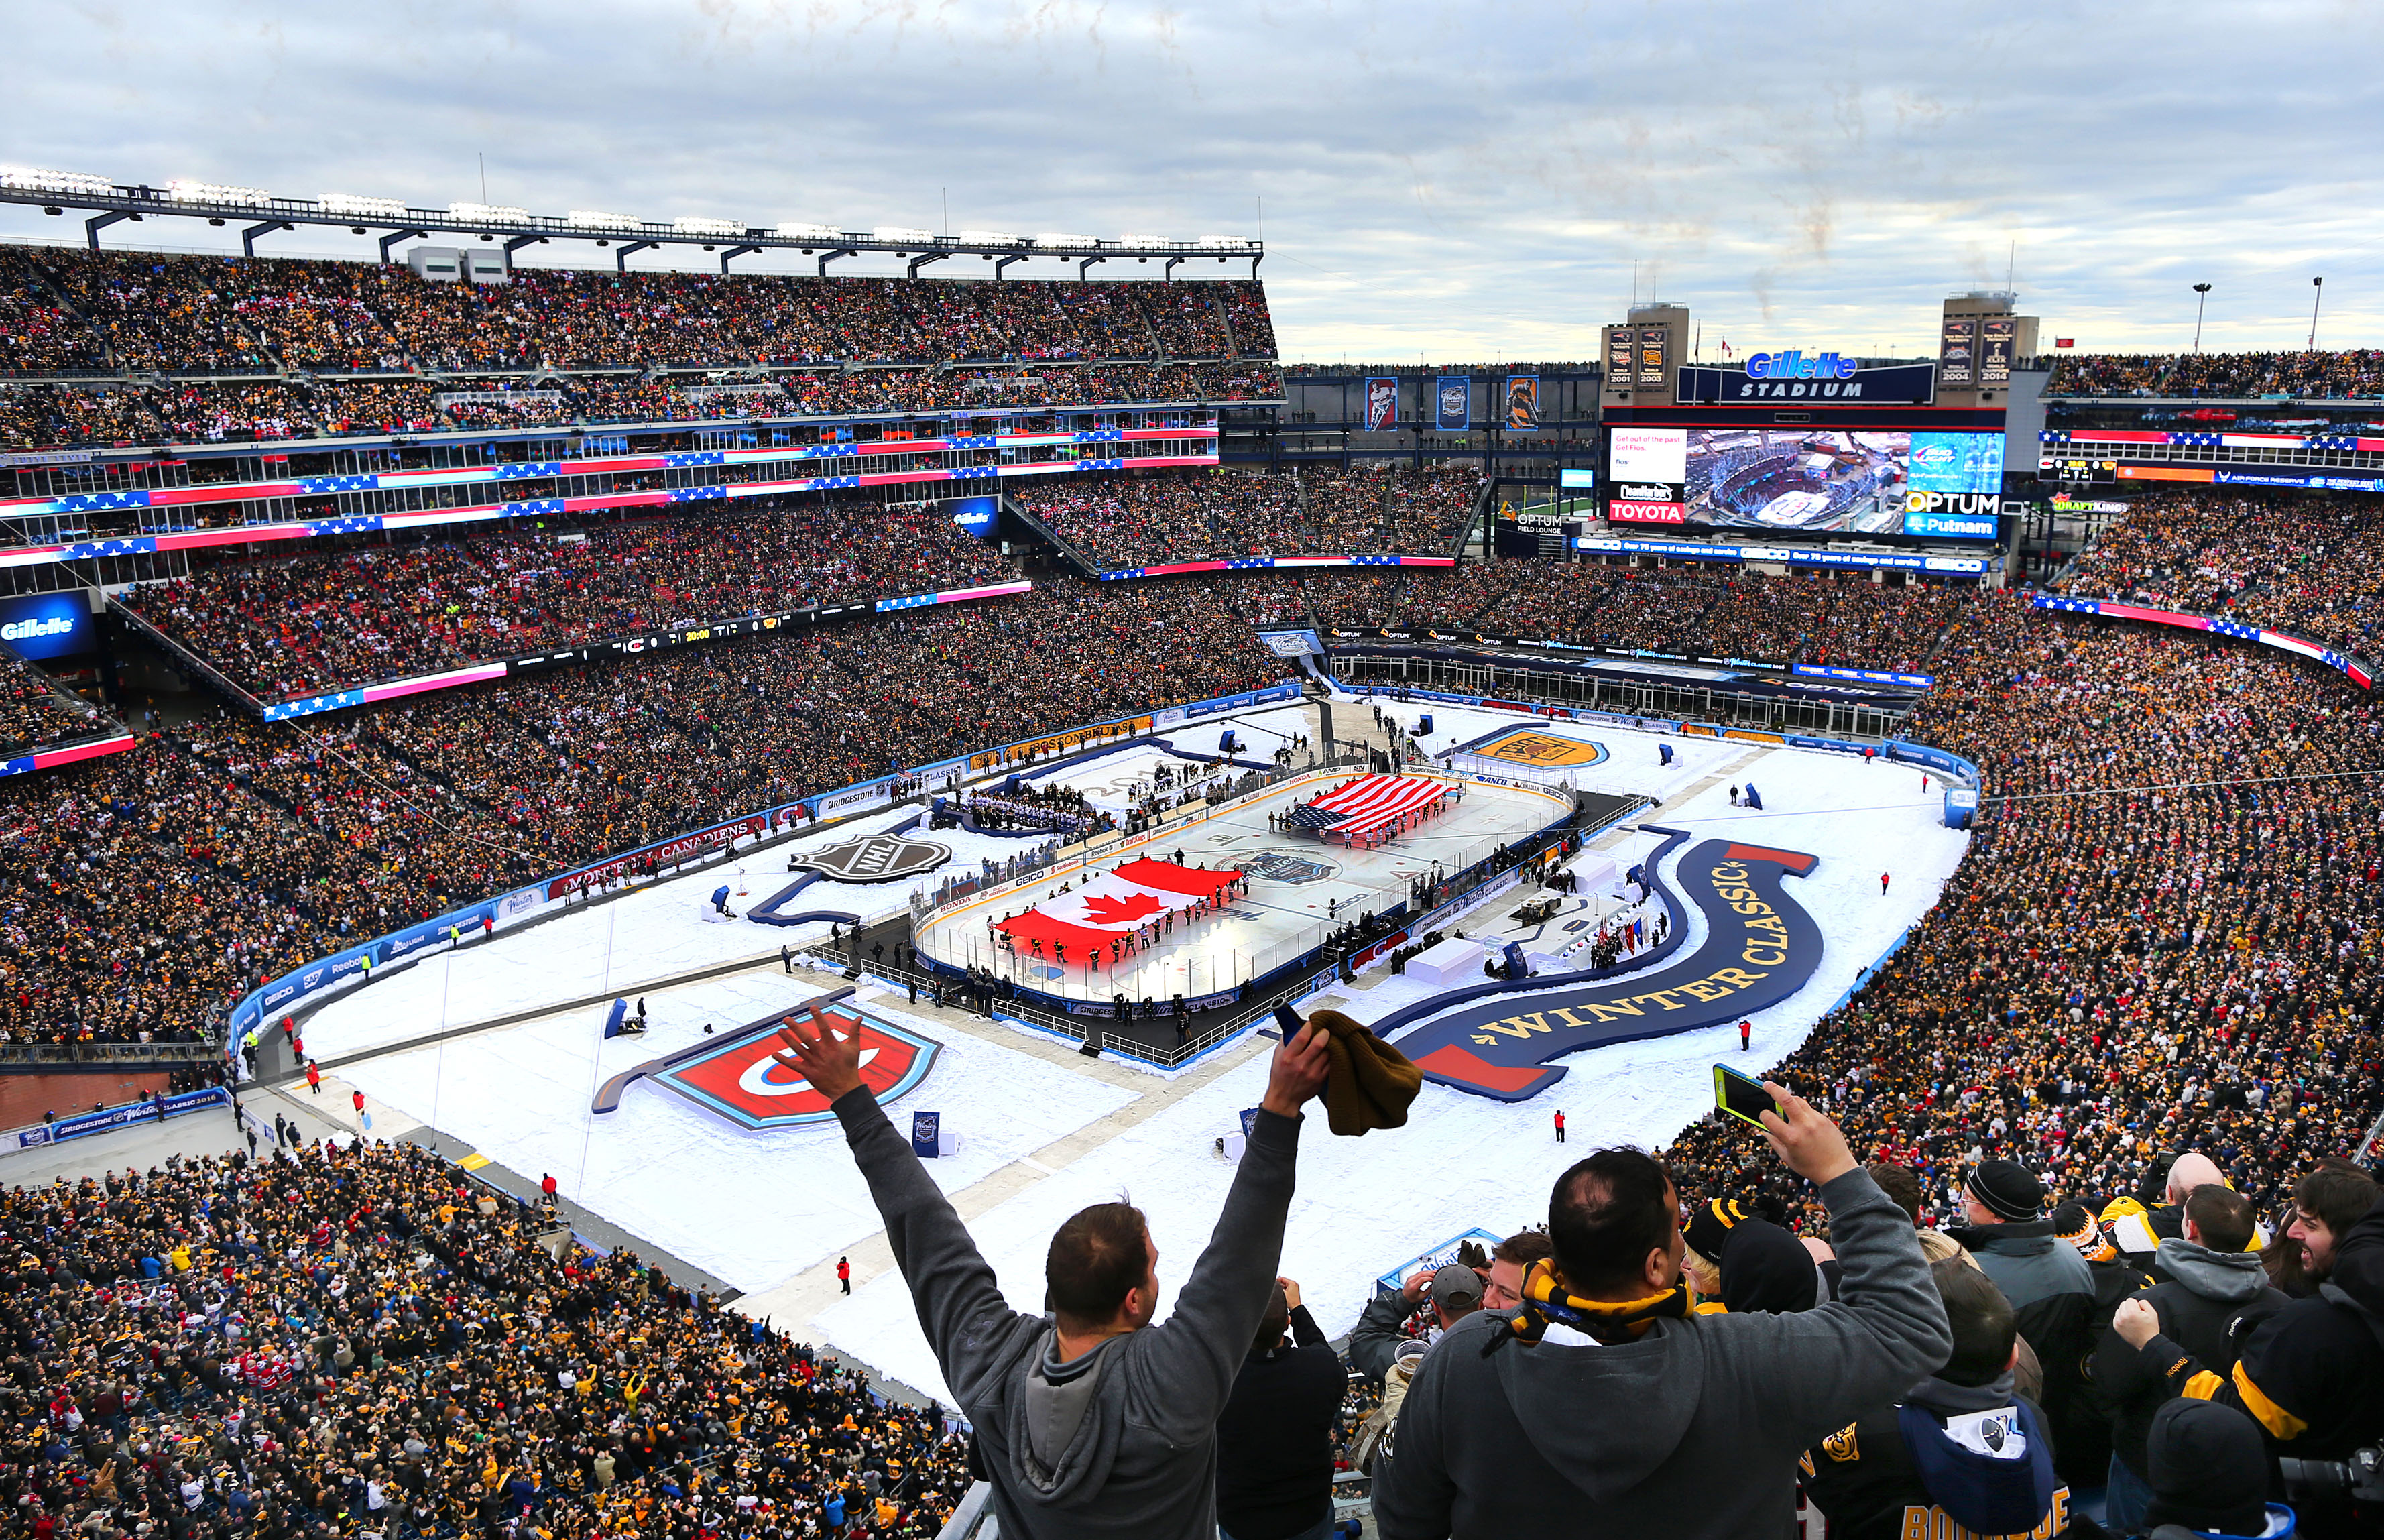 A Beantown Winter Classic - The Globe and Mail